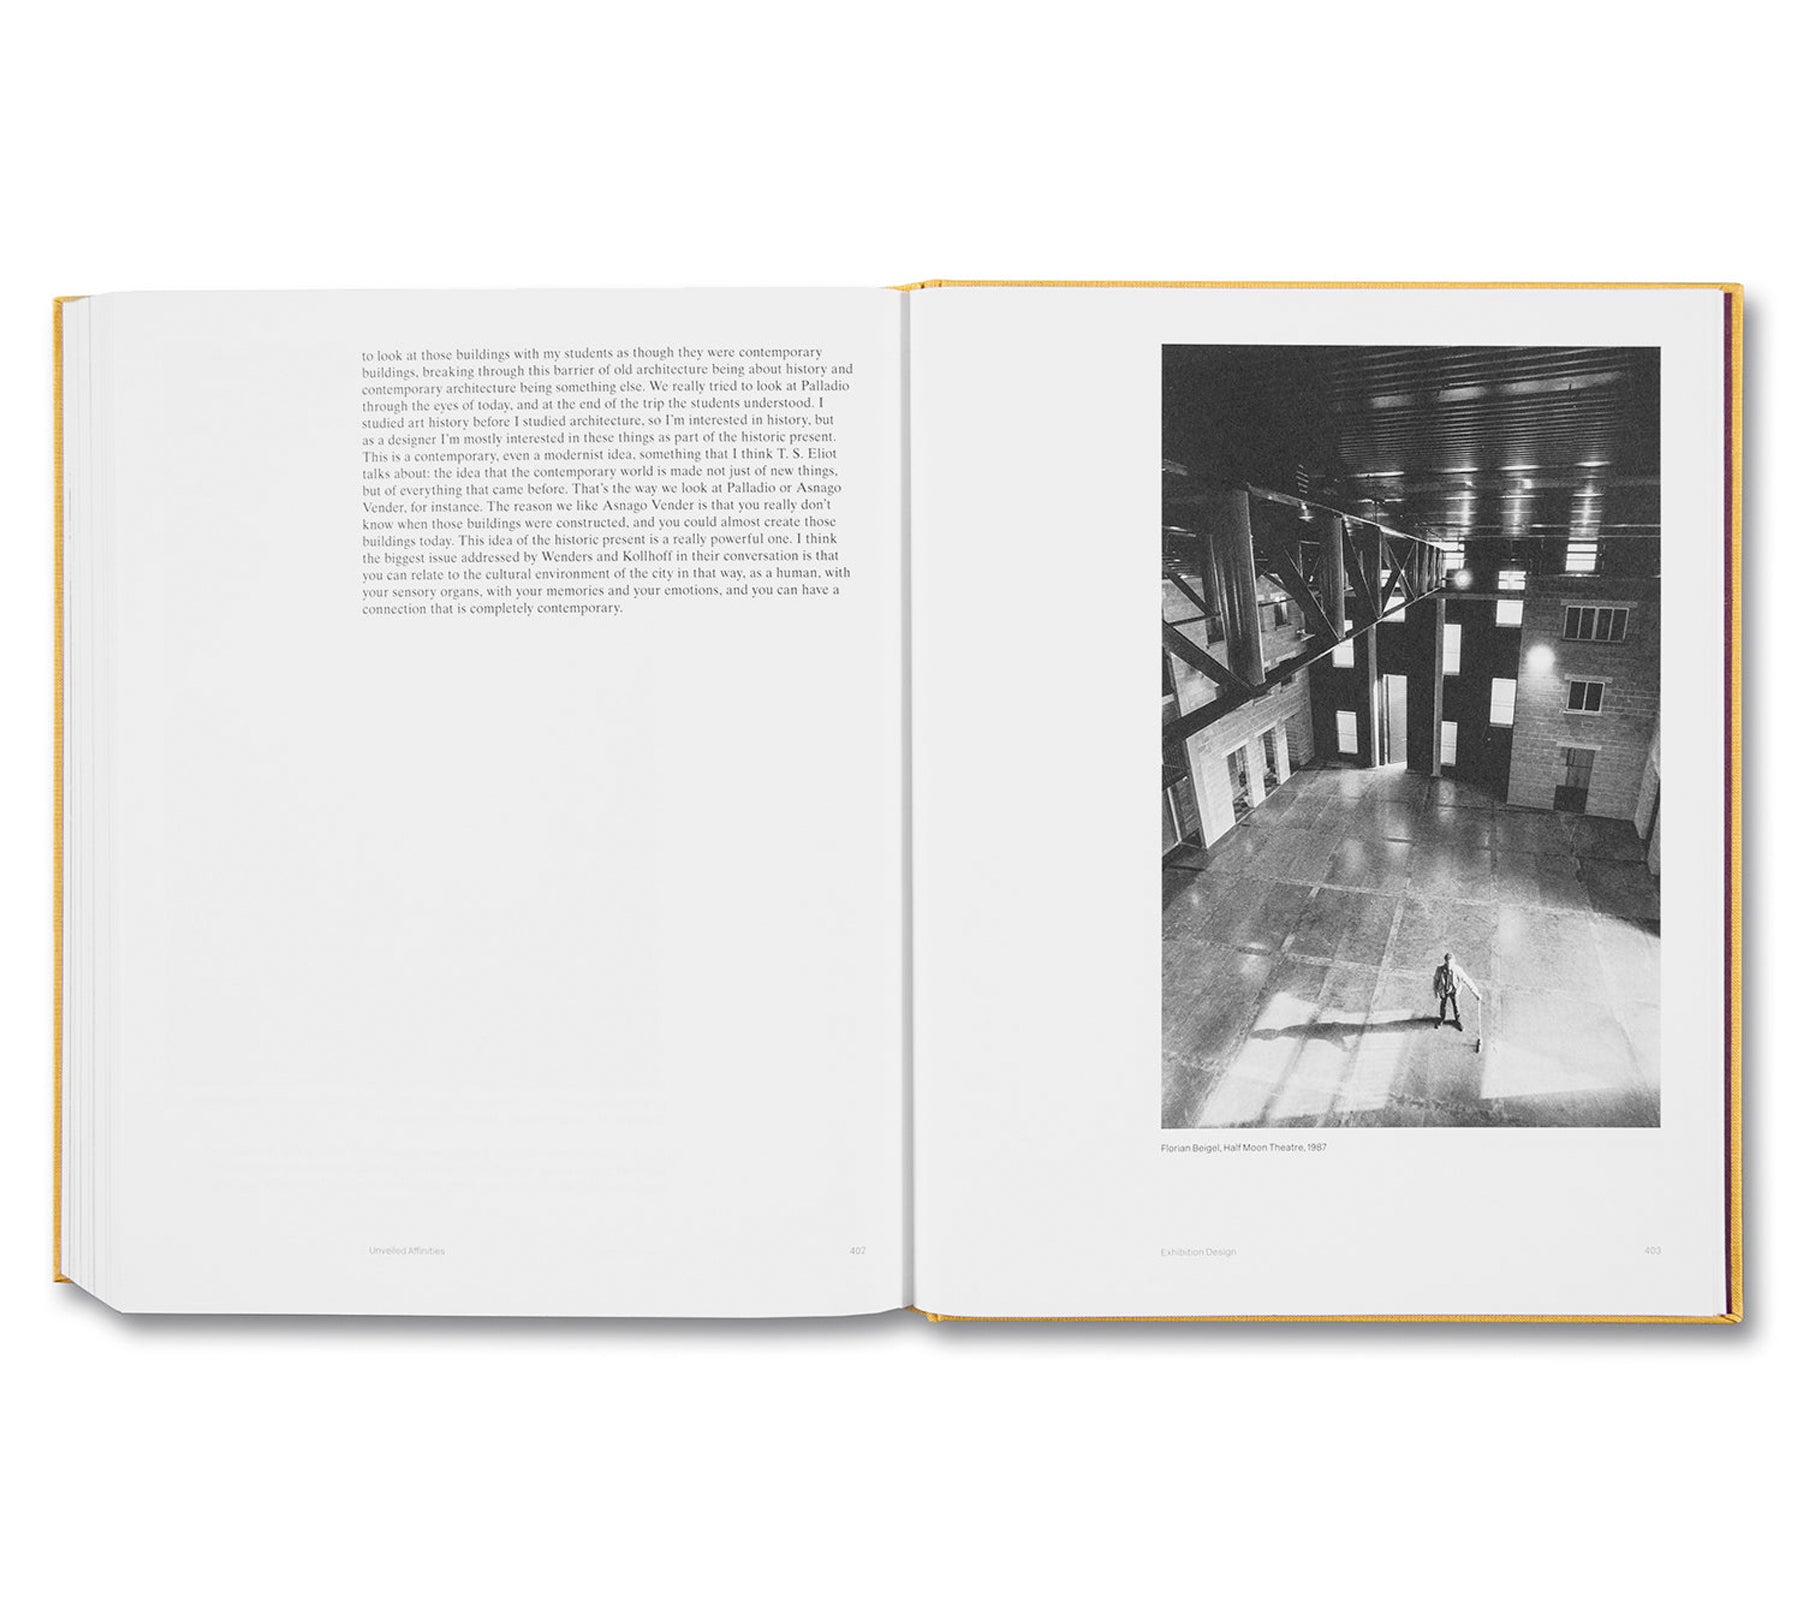 COLLECTED WORKS: VOLUME 1 1990-2005 by Caruso St John